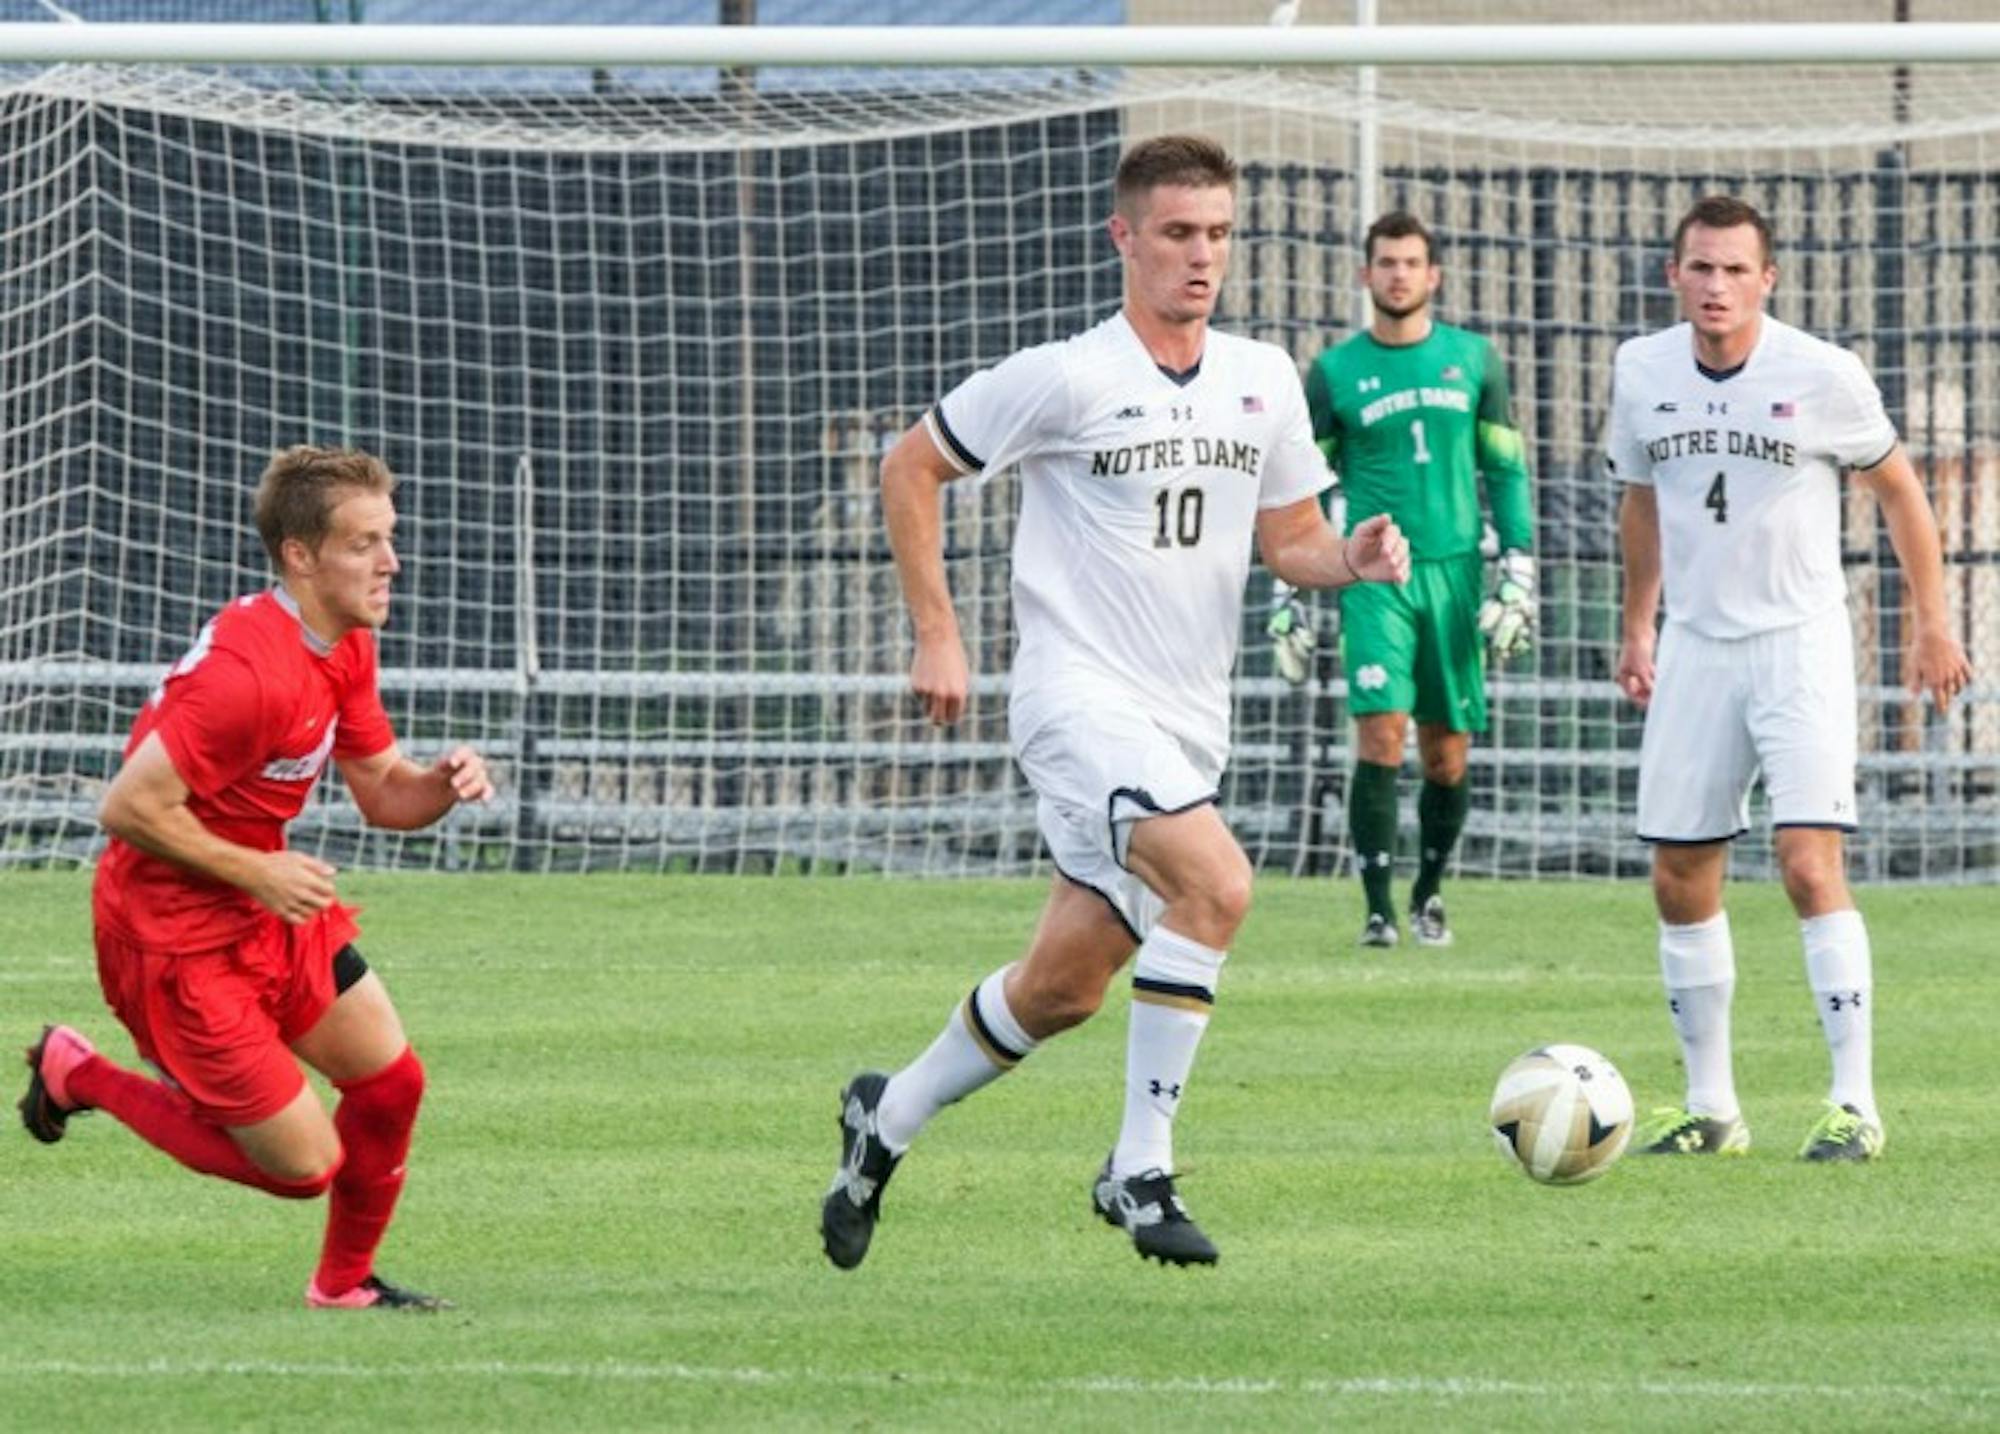 Senior defender Brandon Aubrey dribbles past a New Mexico player during a game at Alumni Stadium on Aug. 28. The Irish won 1-0 and were crowned champions of the Mike Berticelli Memorial Tournament.